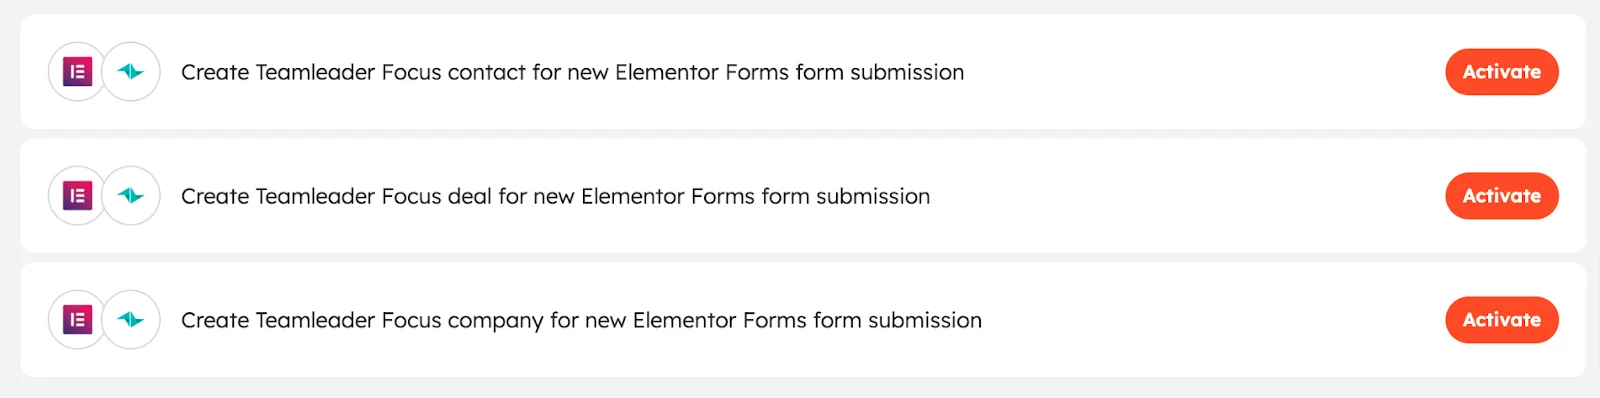 Elementor Forms automation